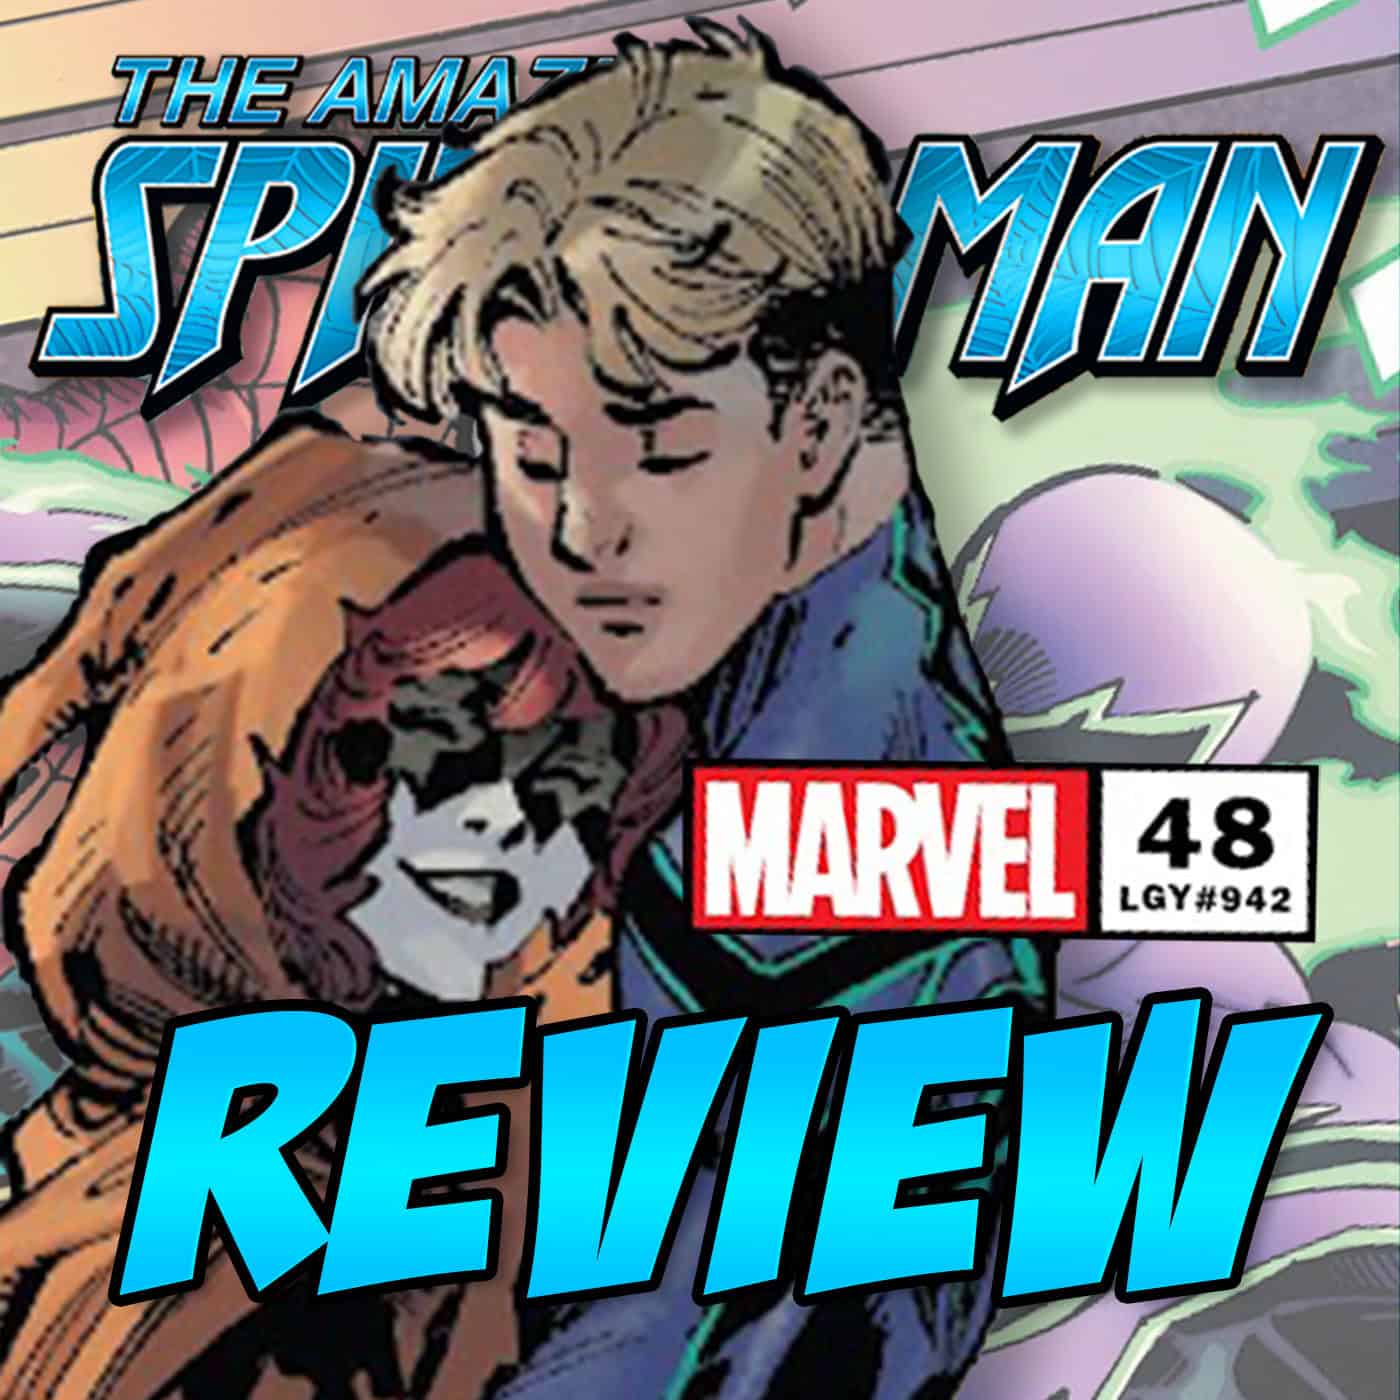 The Amazing Spider-Man (vol. 6) #48 – REVIEW